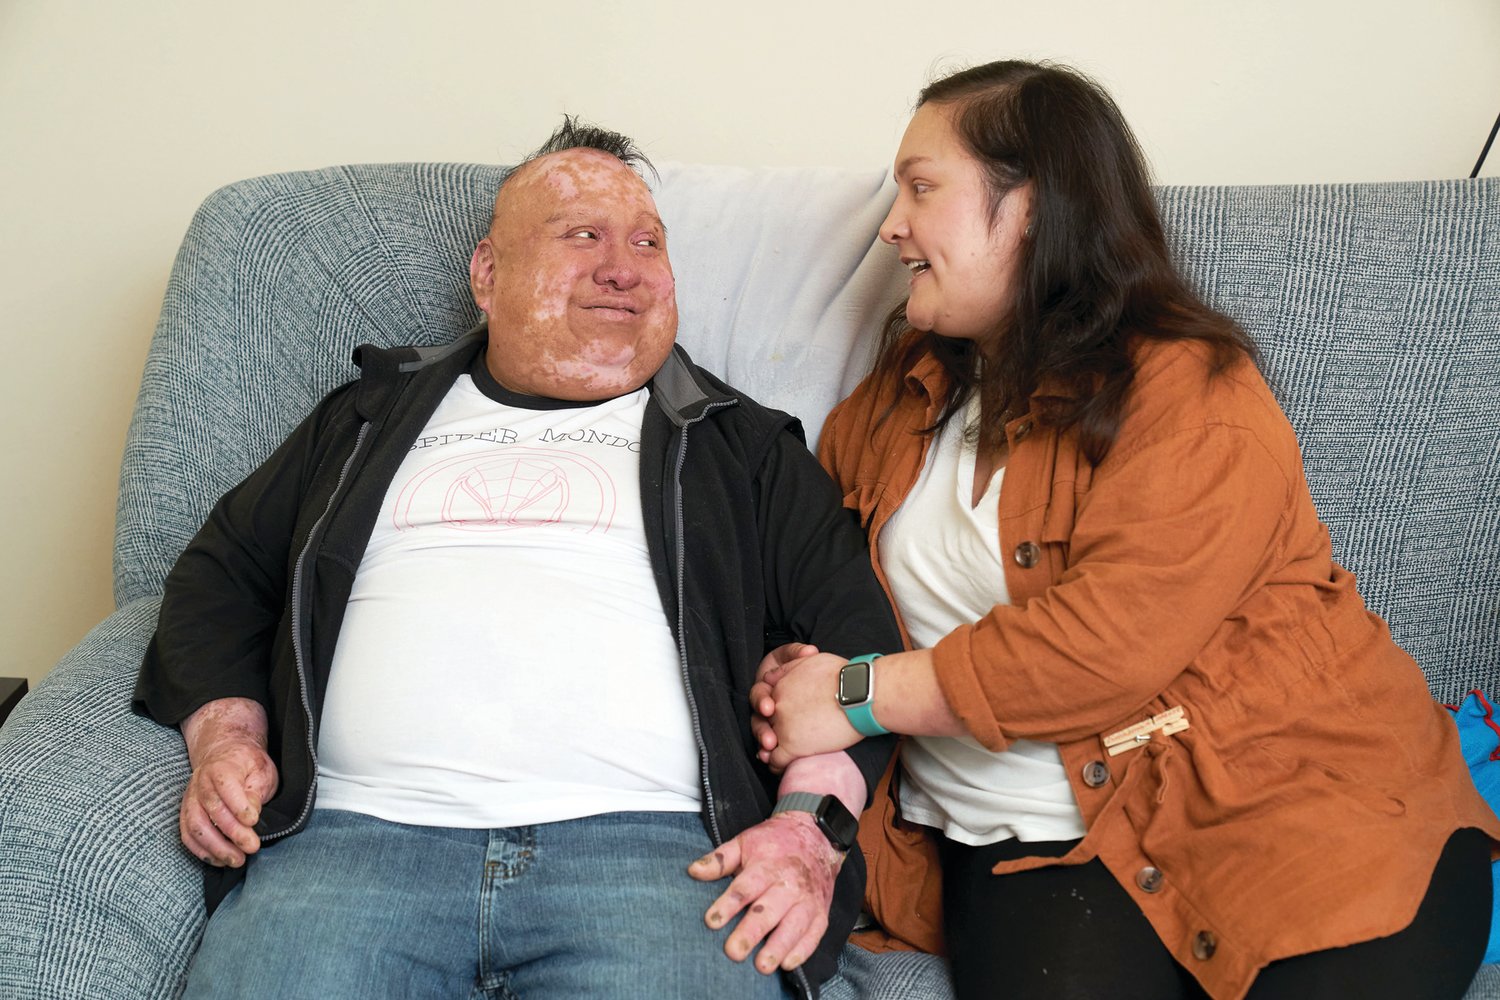 On Rare Disease Day, Armando Head-McCurdy and Sarah Morrill, of Bensalem, discuss life, love and how they manage Epidermolysis Bullosa.